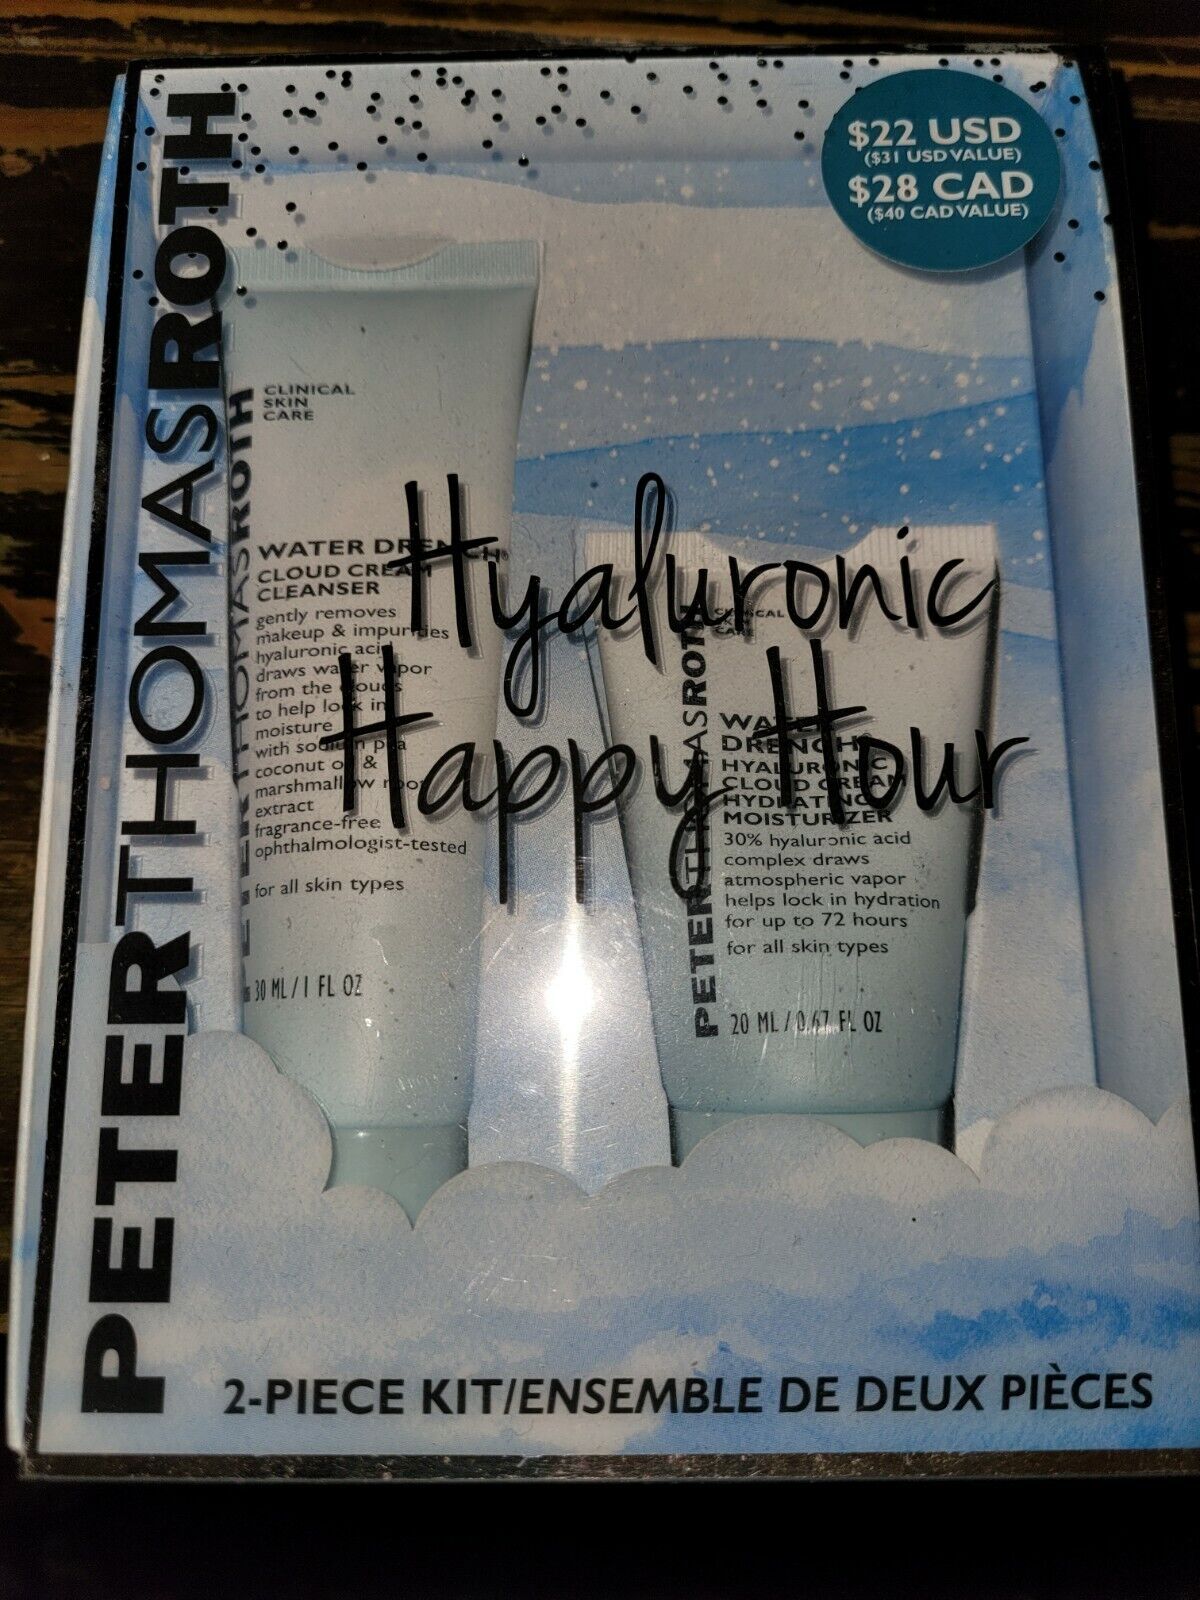 New! Peter Thomas Roth Hyaluronic Happy Hour 2 × piece TRAVEL SIZE Water Drench